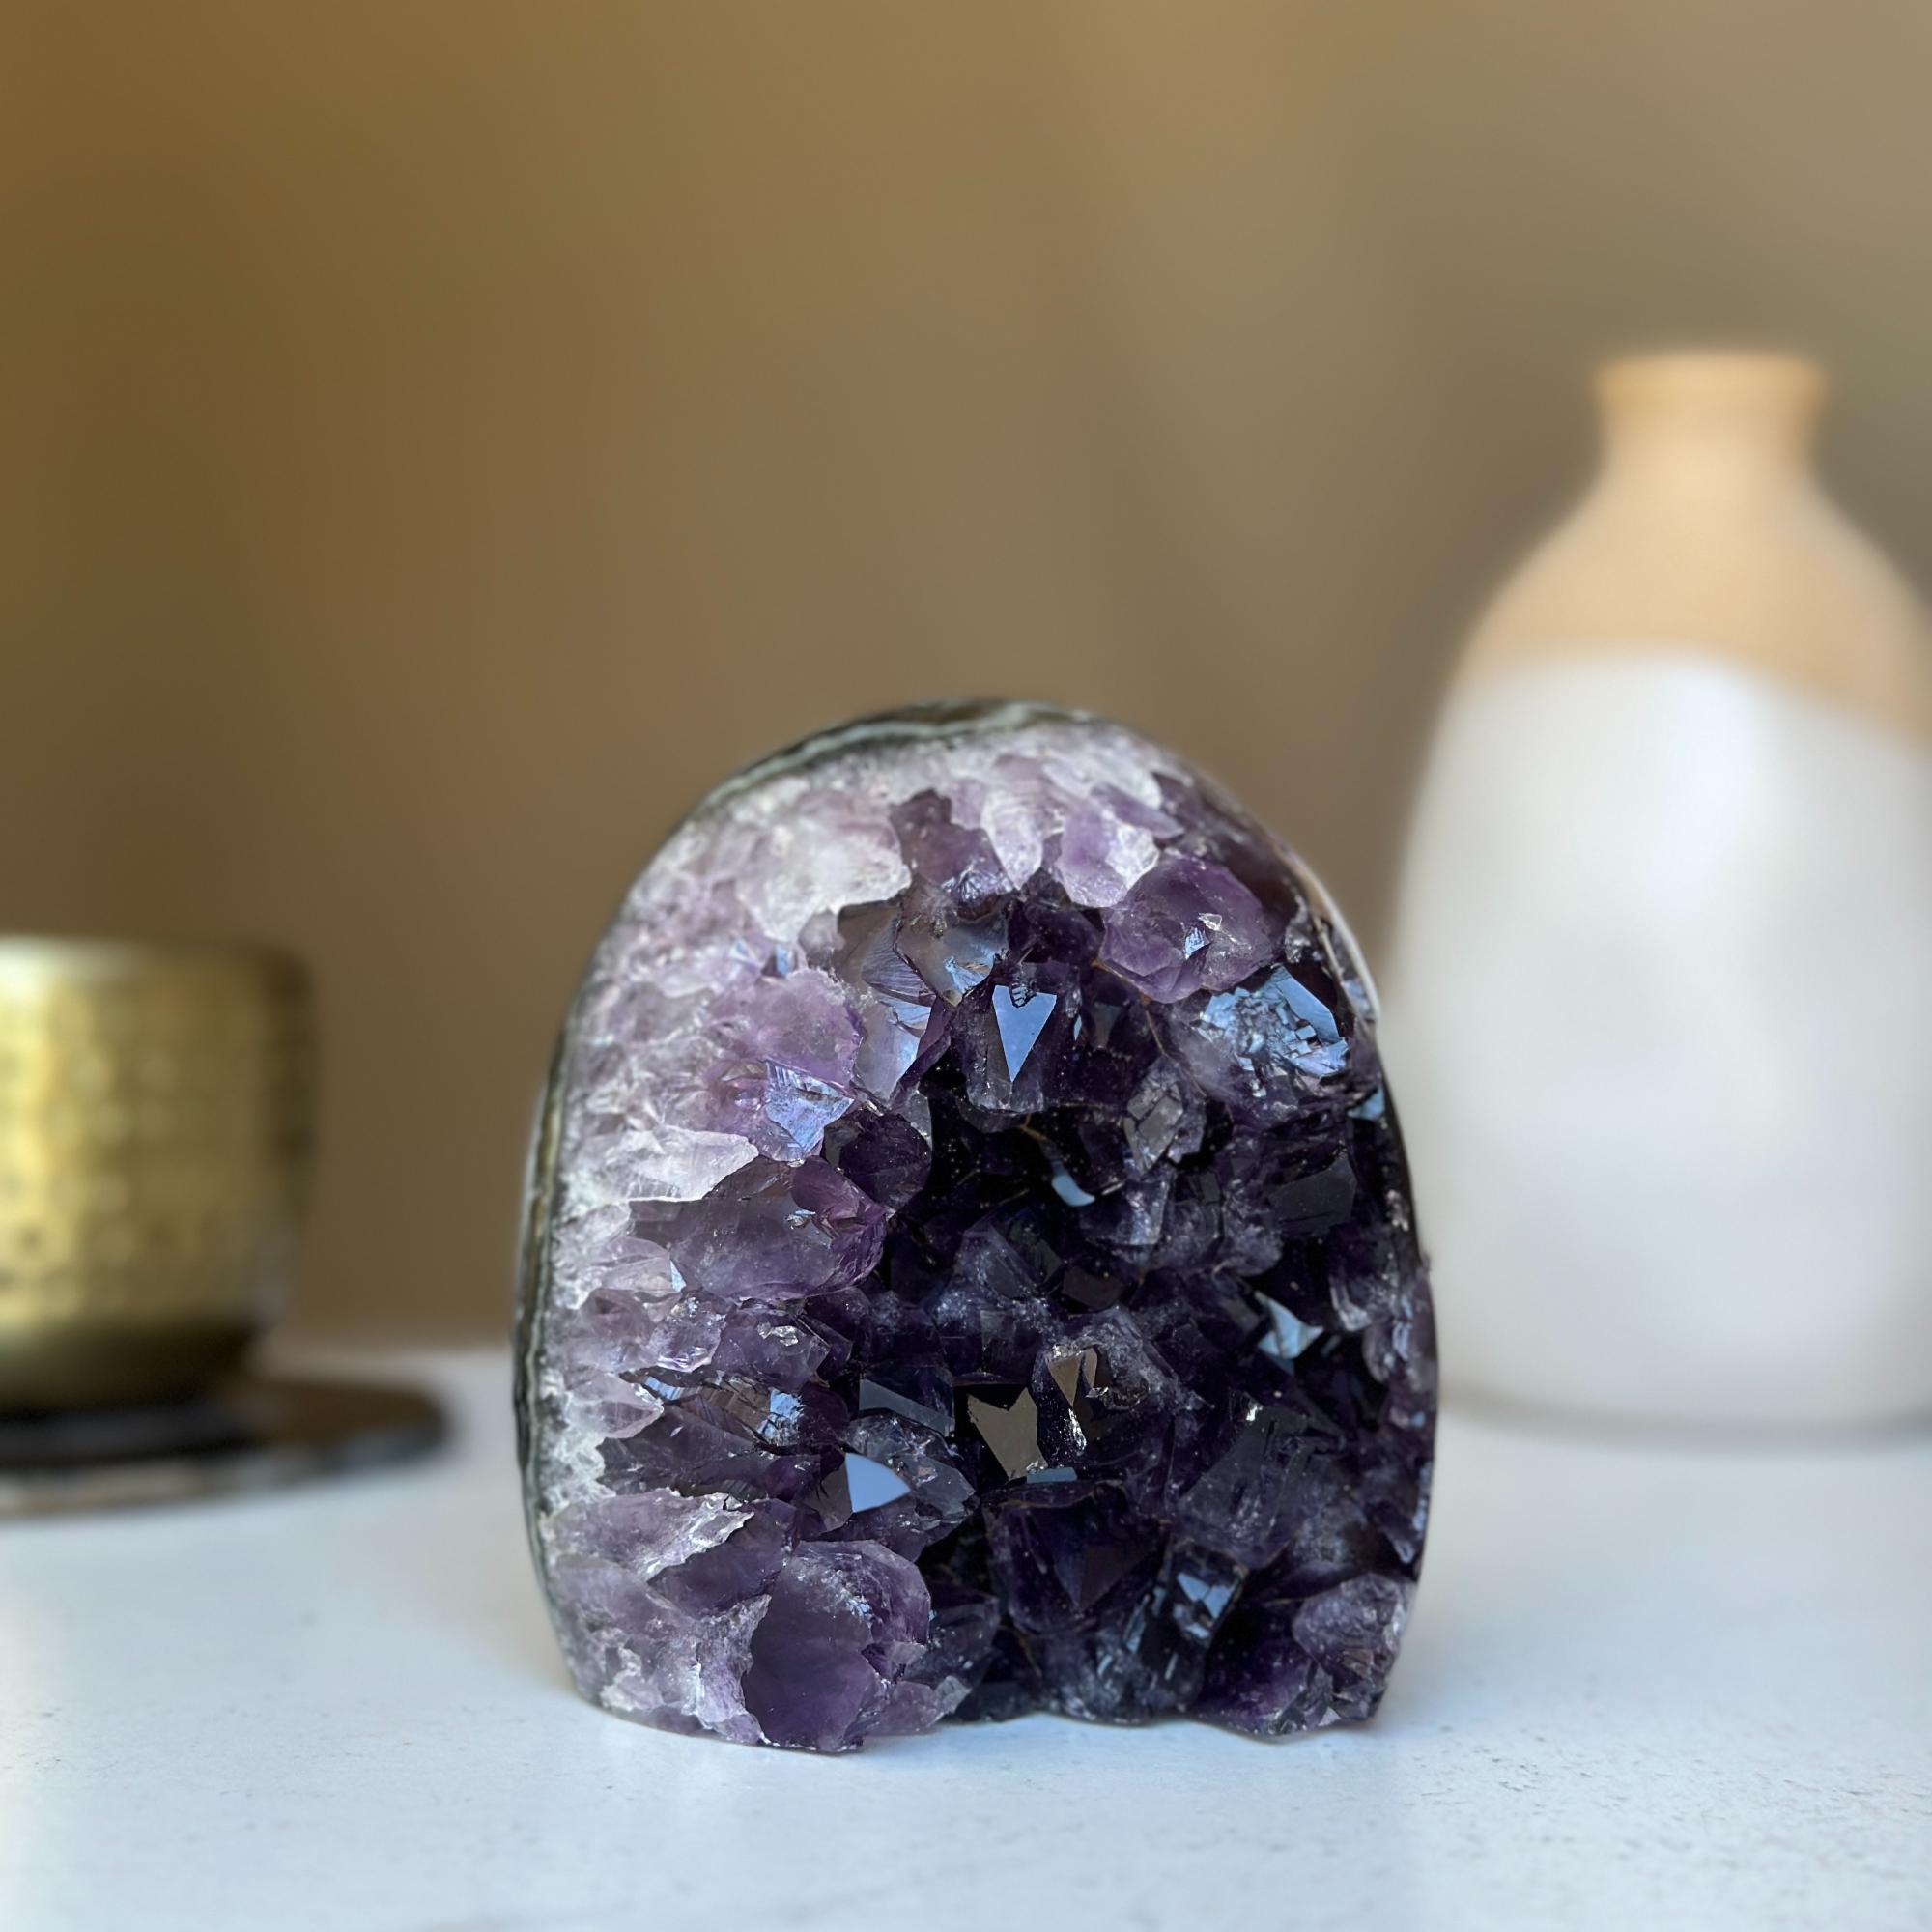 Large amethyst geode with FREE GIFT BOX, Mindfulness gift